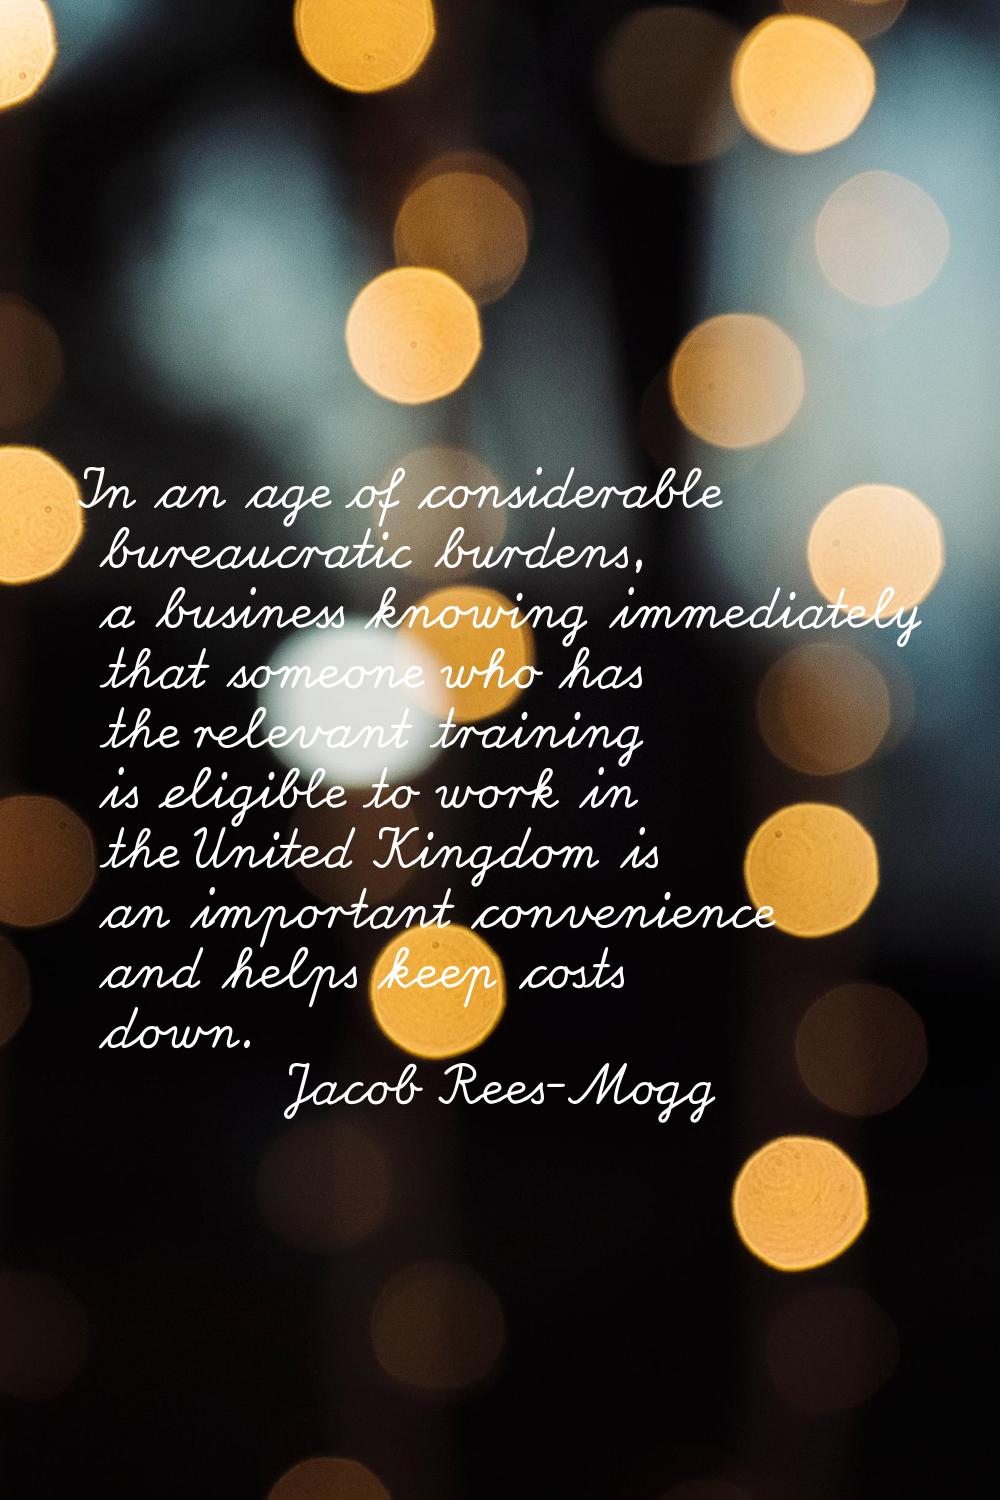 In an age of considerable bureaucratic burdens, a business knowing immediately that someone who has